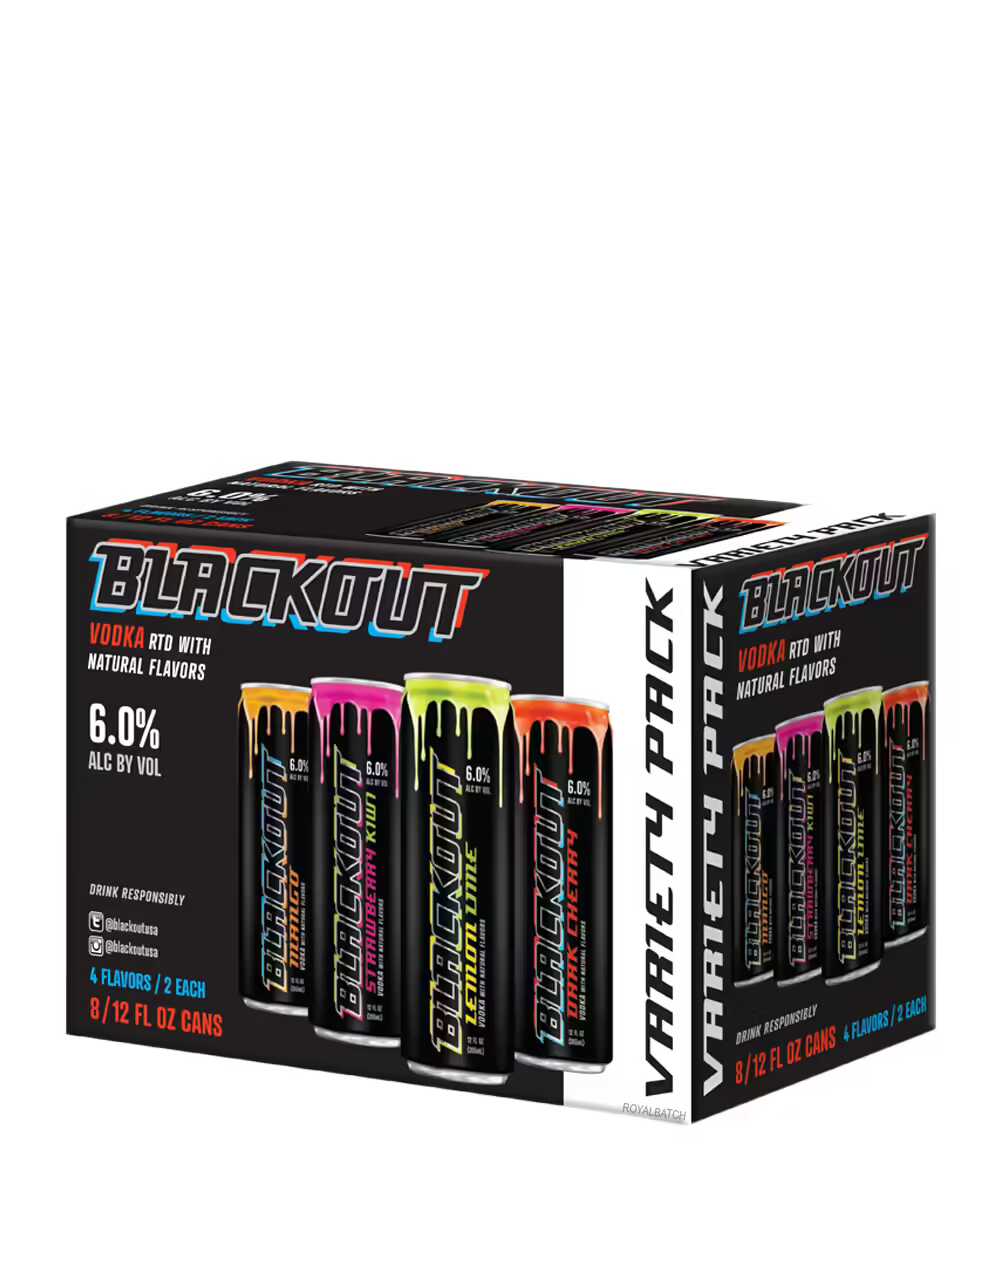 Blackout Vodka RTD With Natural Flavors Variety (8 Pack) 355ml